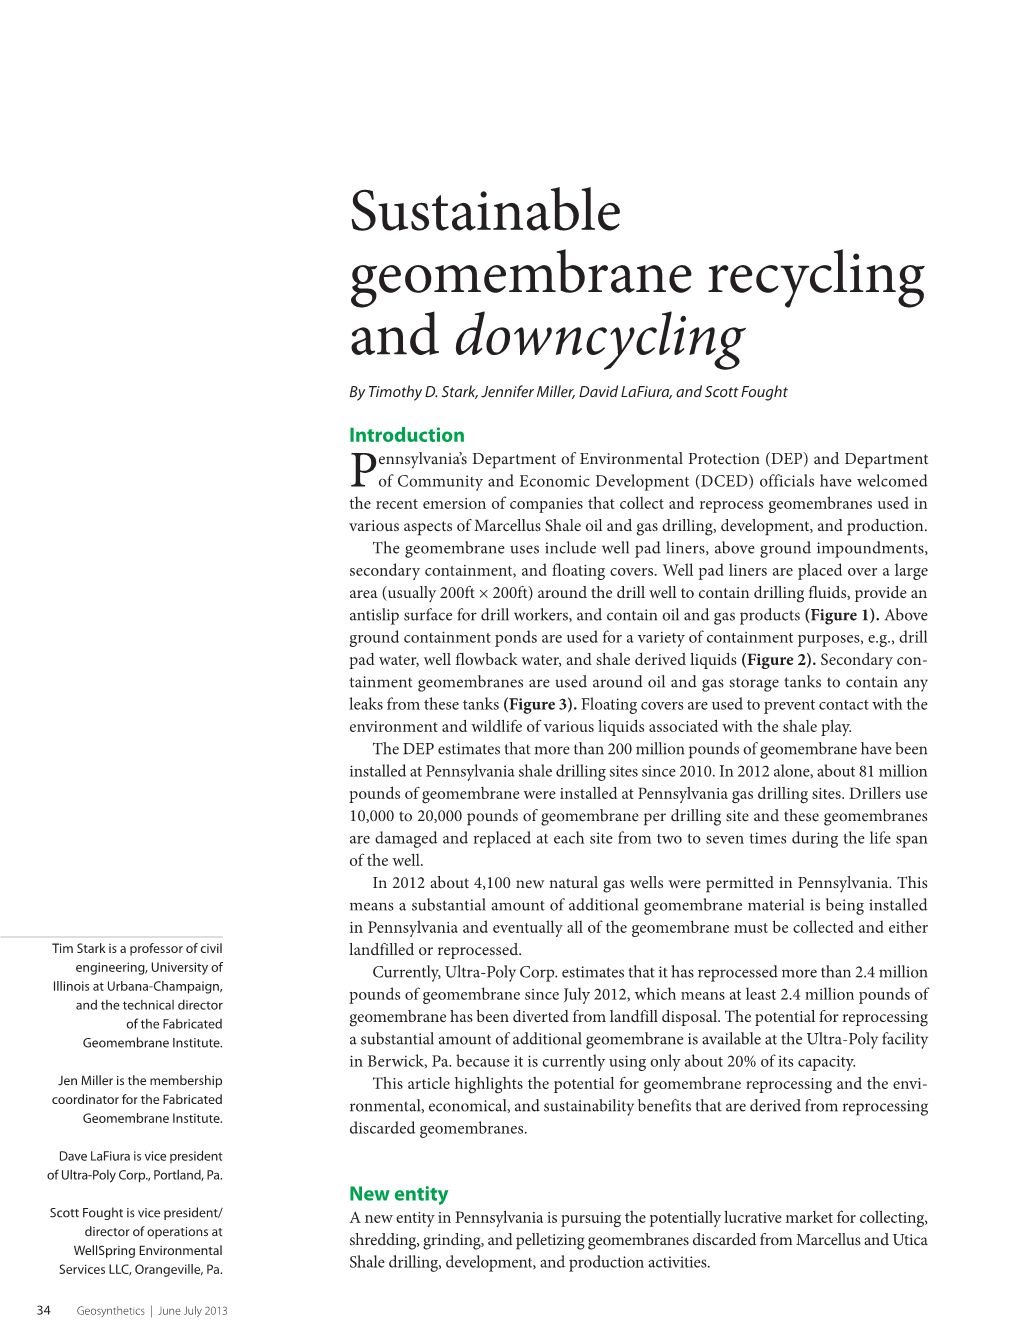 Sustainable Geomembrane Recycling and Downcycling by Timothy D